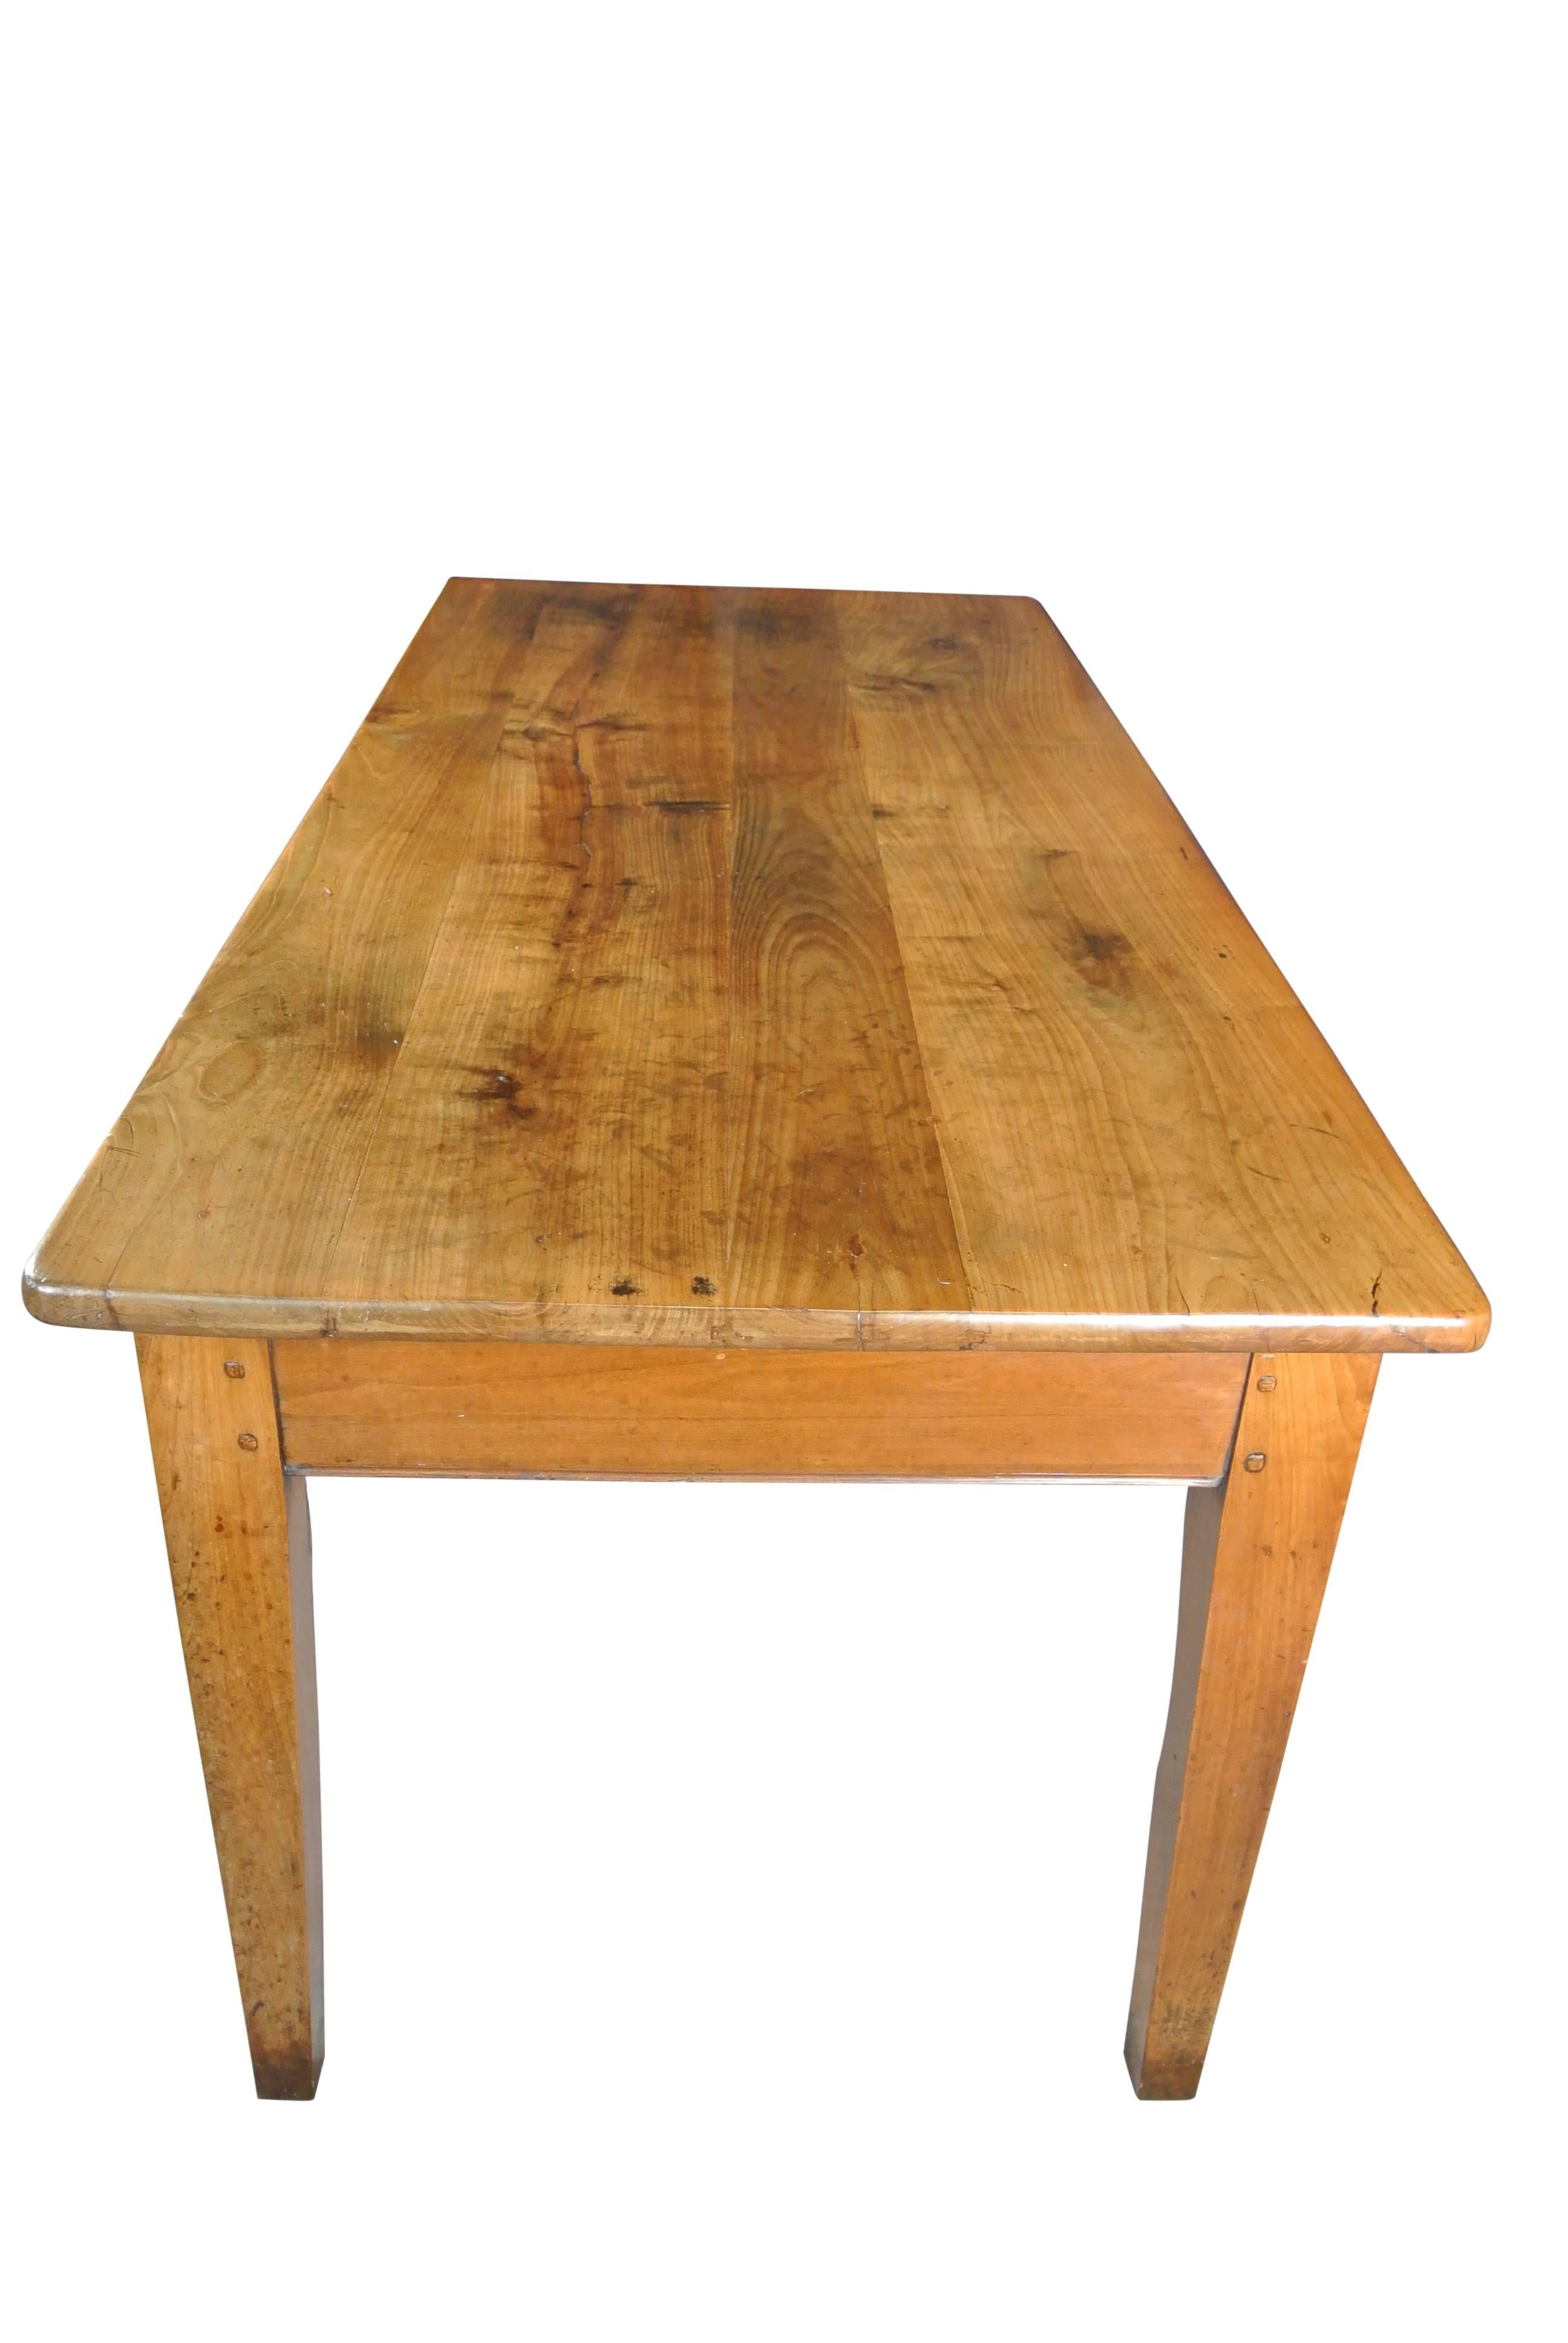 French Provincial Large 19th Century, French Cherrywood Farmhouse Table